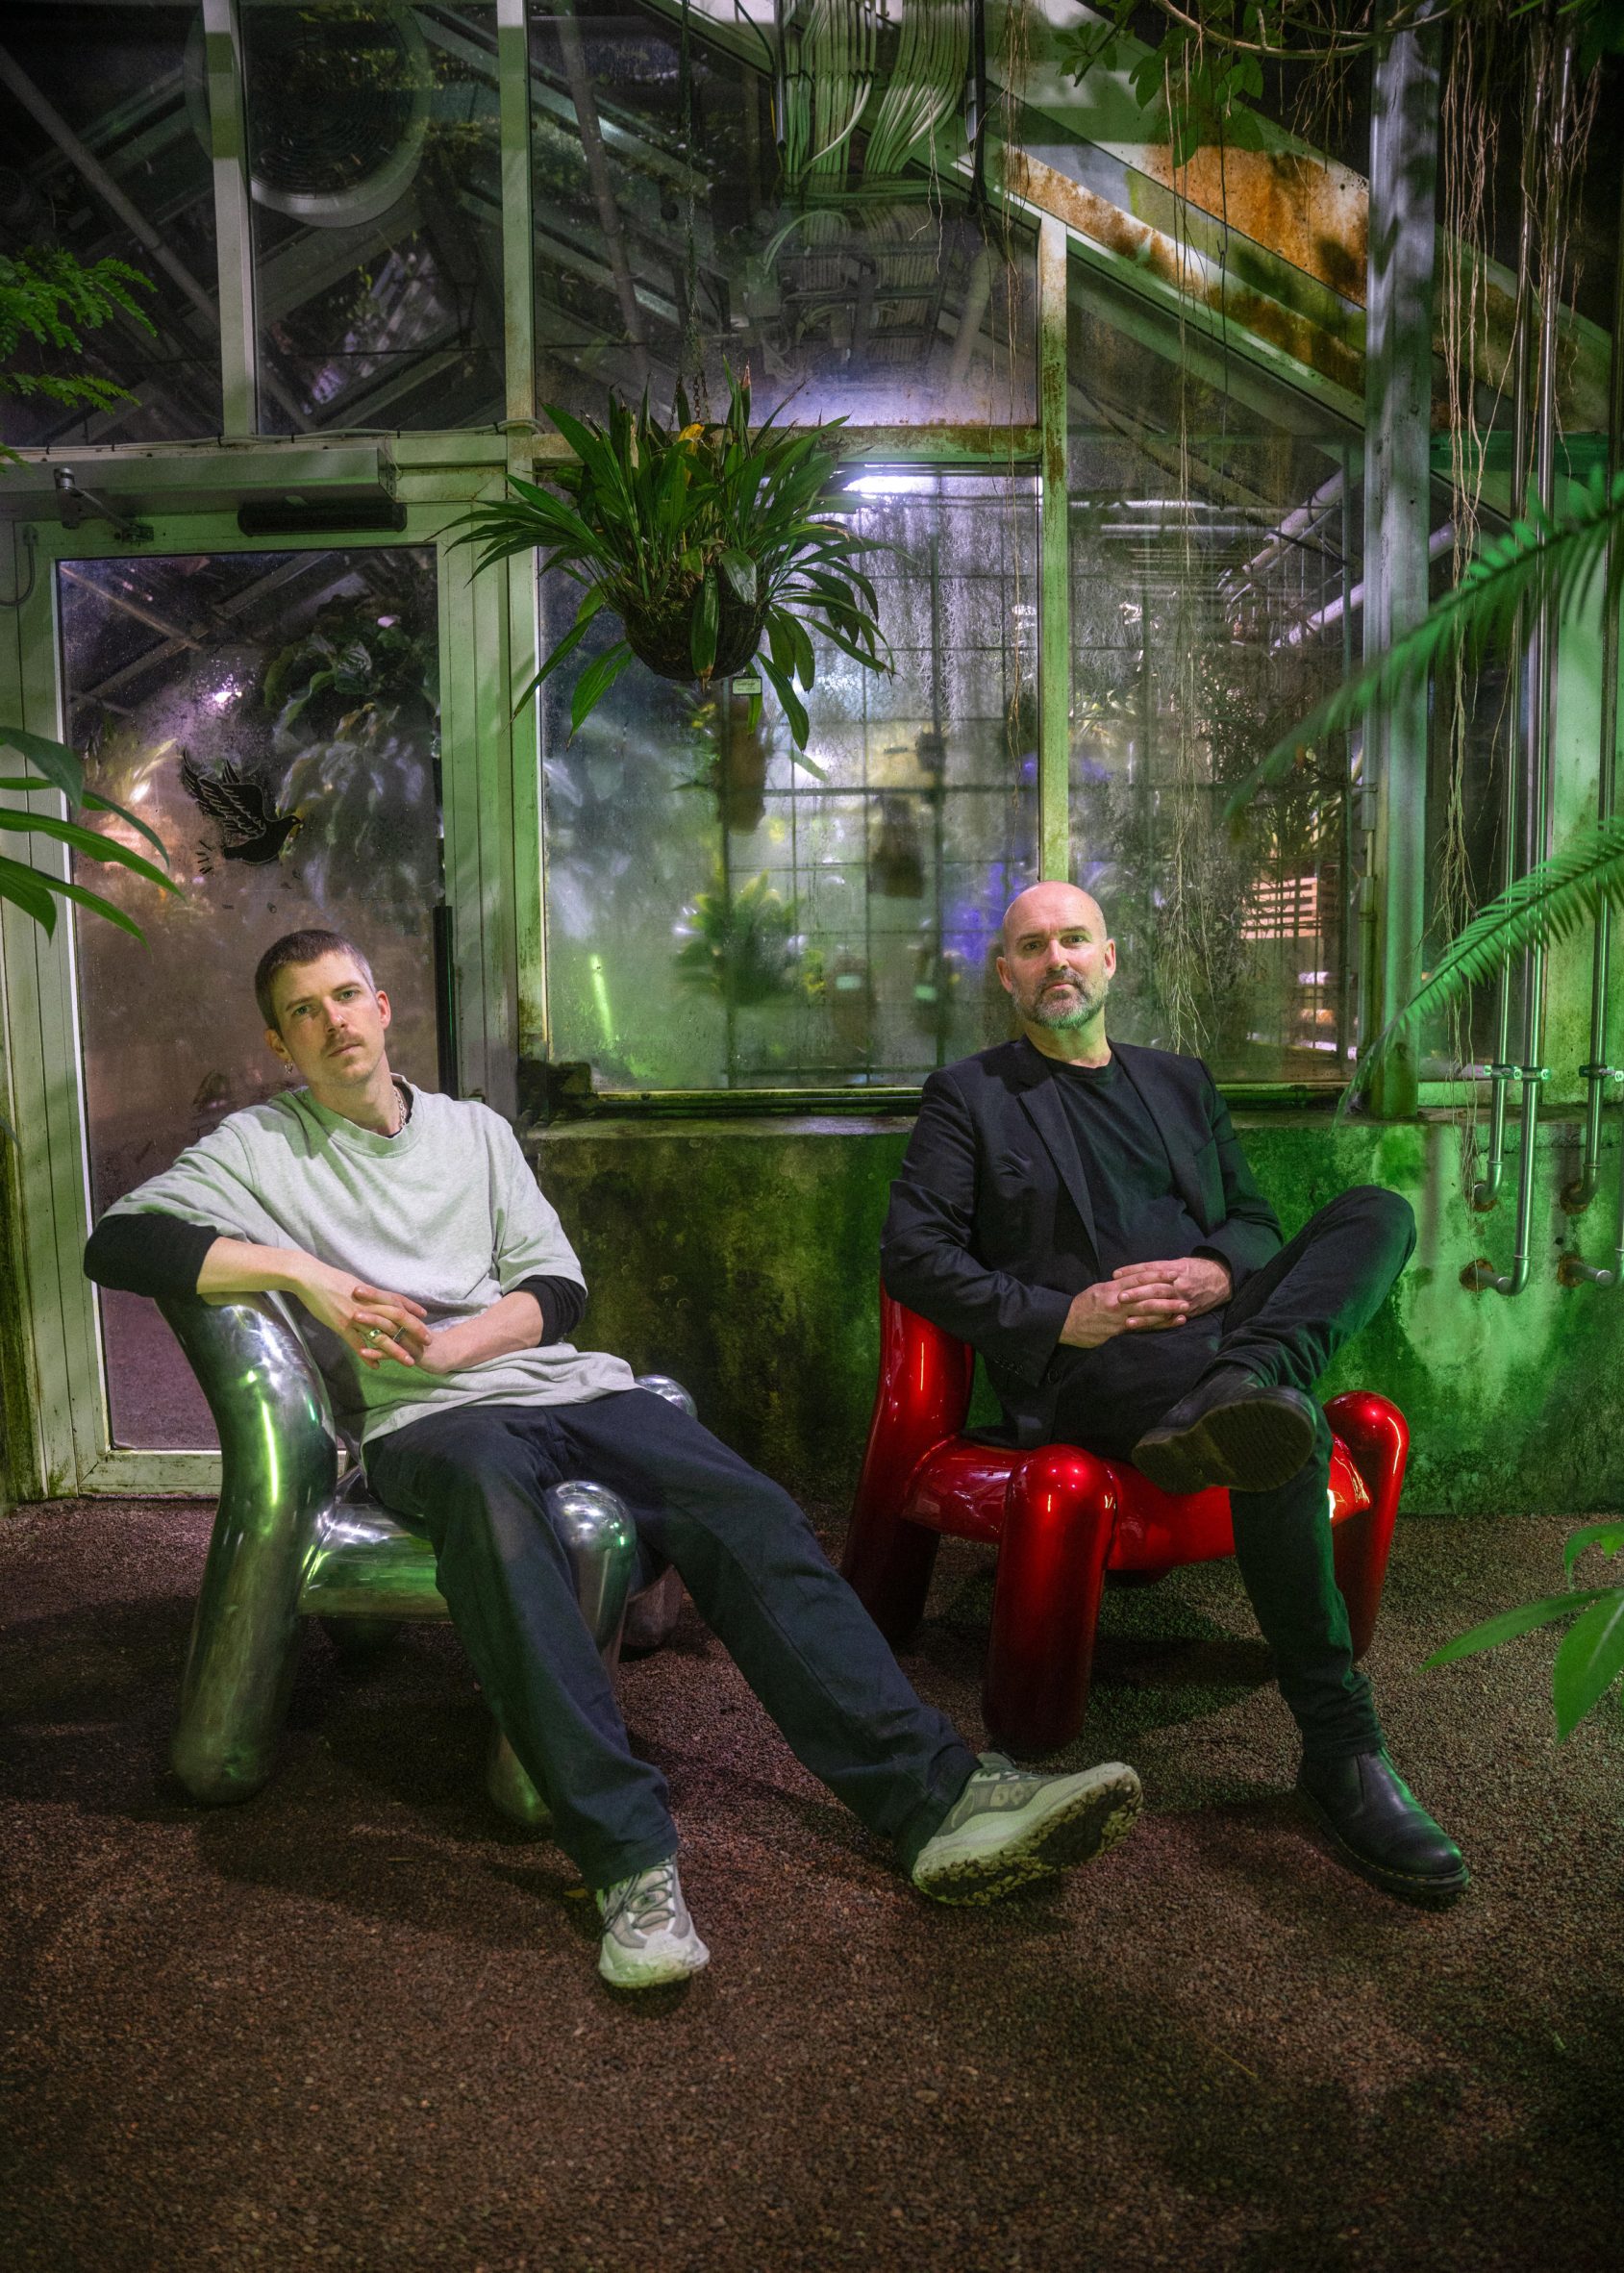 Alexander Lervik and Gustav Winsth sitting on their Reality chairs